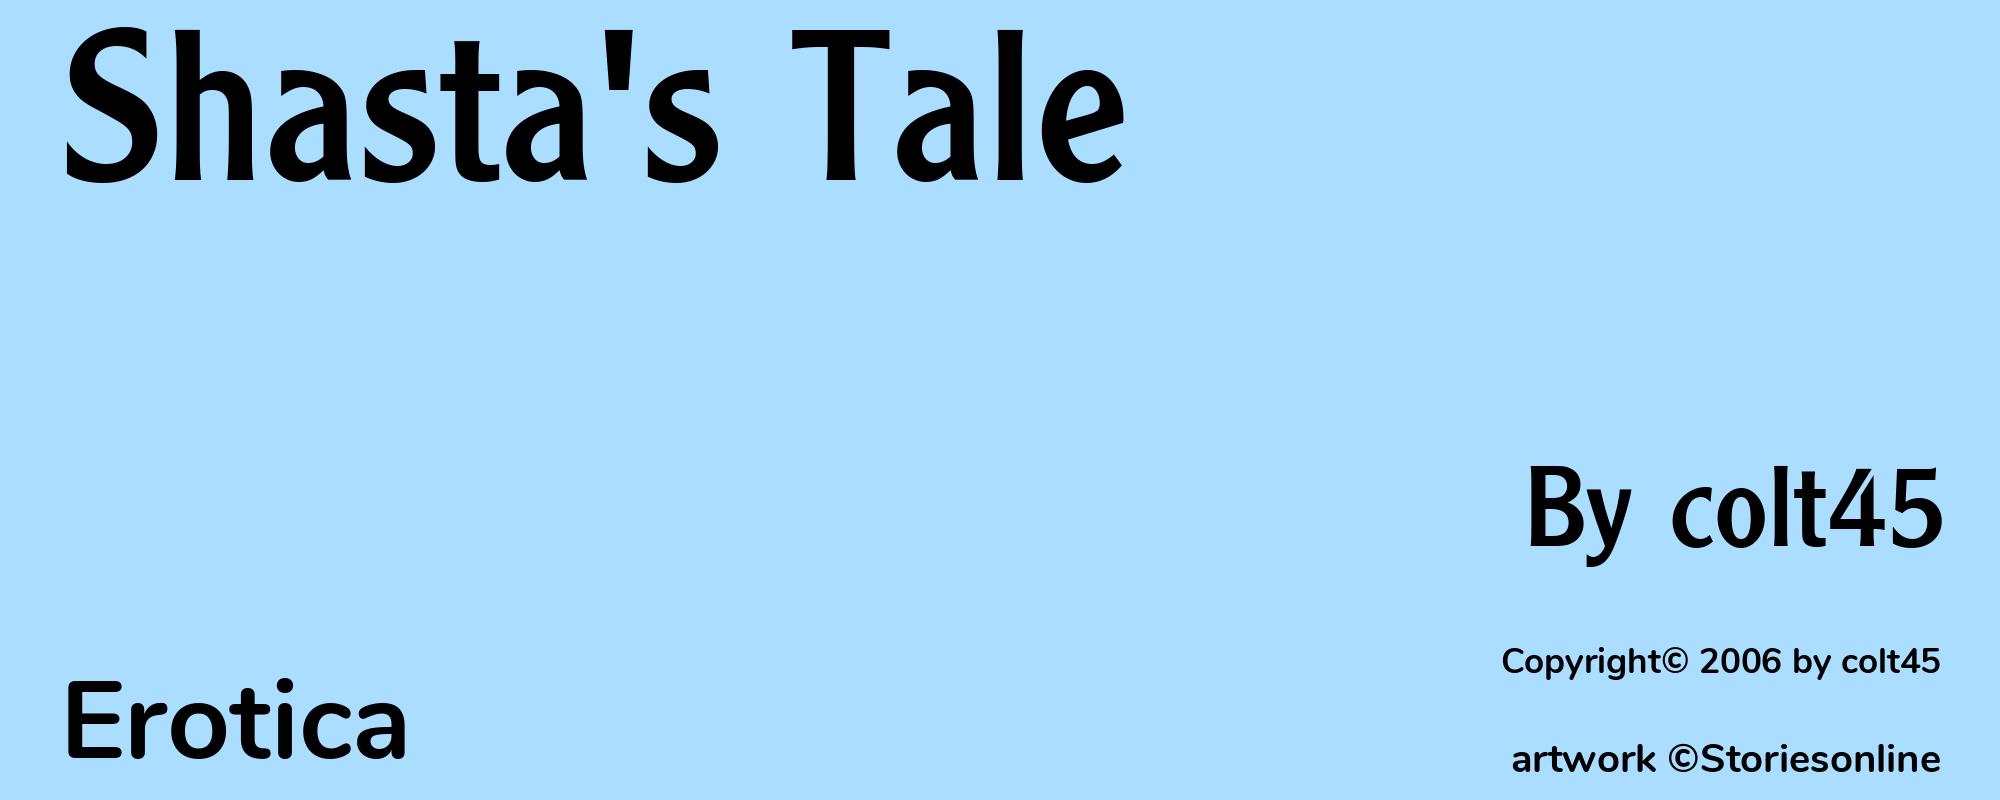 Shasta's Tale - Cover